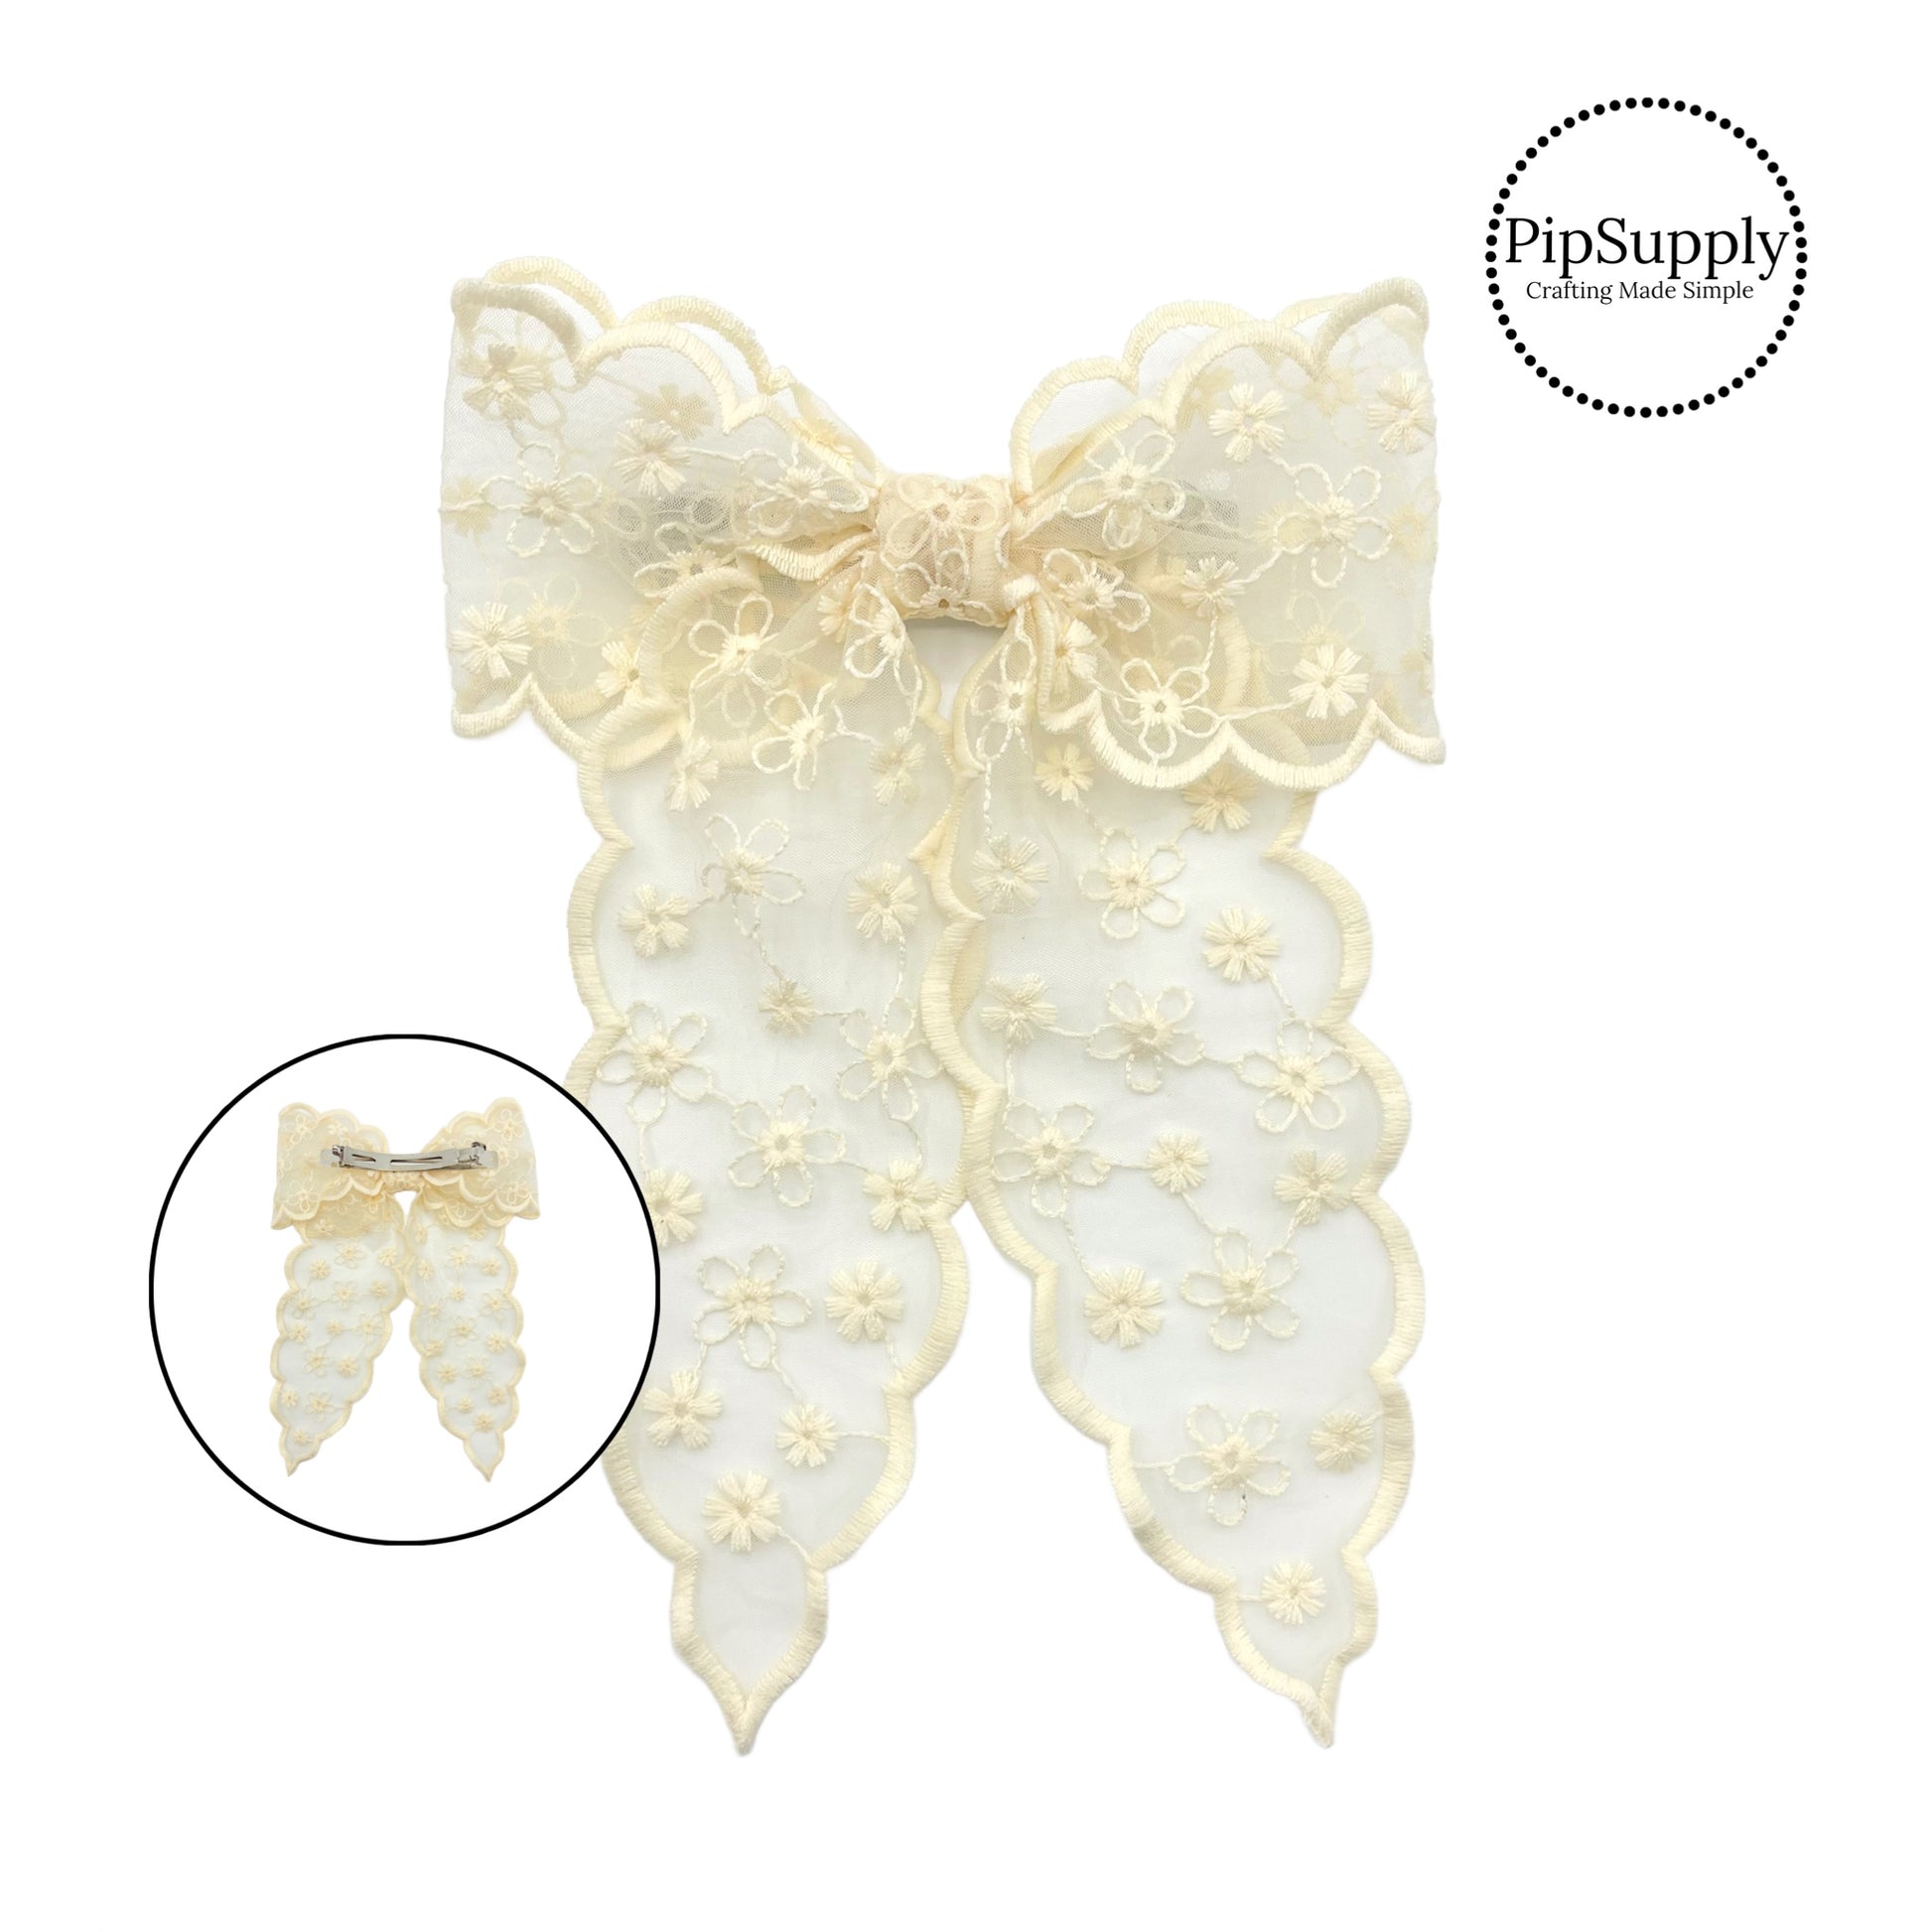 These cream colored tulle pointed large hair bow strips are ready to package and resell to your customers no sewing or measuring necessary! These come pre-tied with an attached barrette clip. The floral stitching on the bow is perfect for spring. 